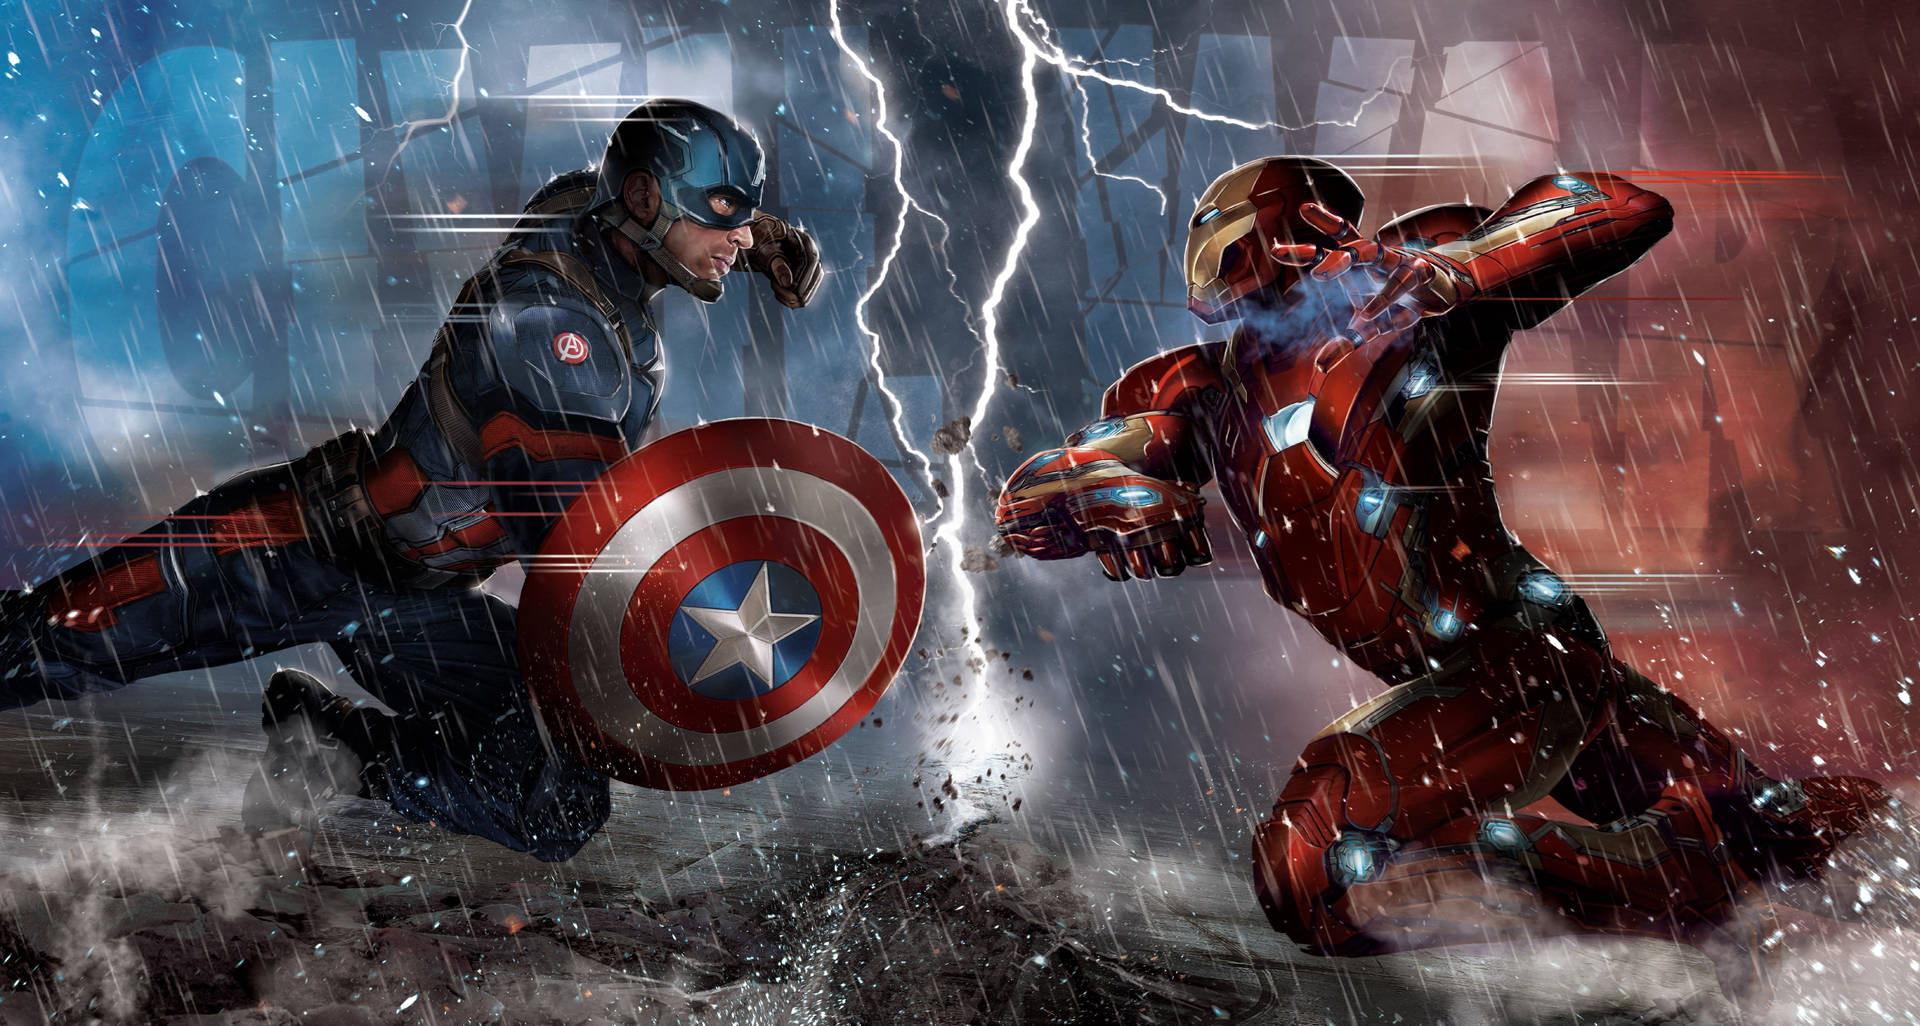 A thrilling battle between Captain America and Iron Man in the rain Wallpaper